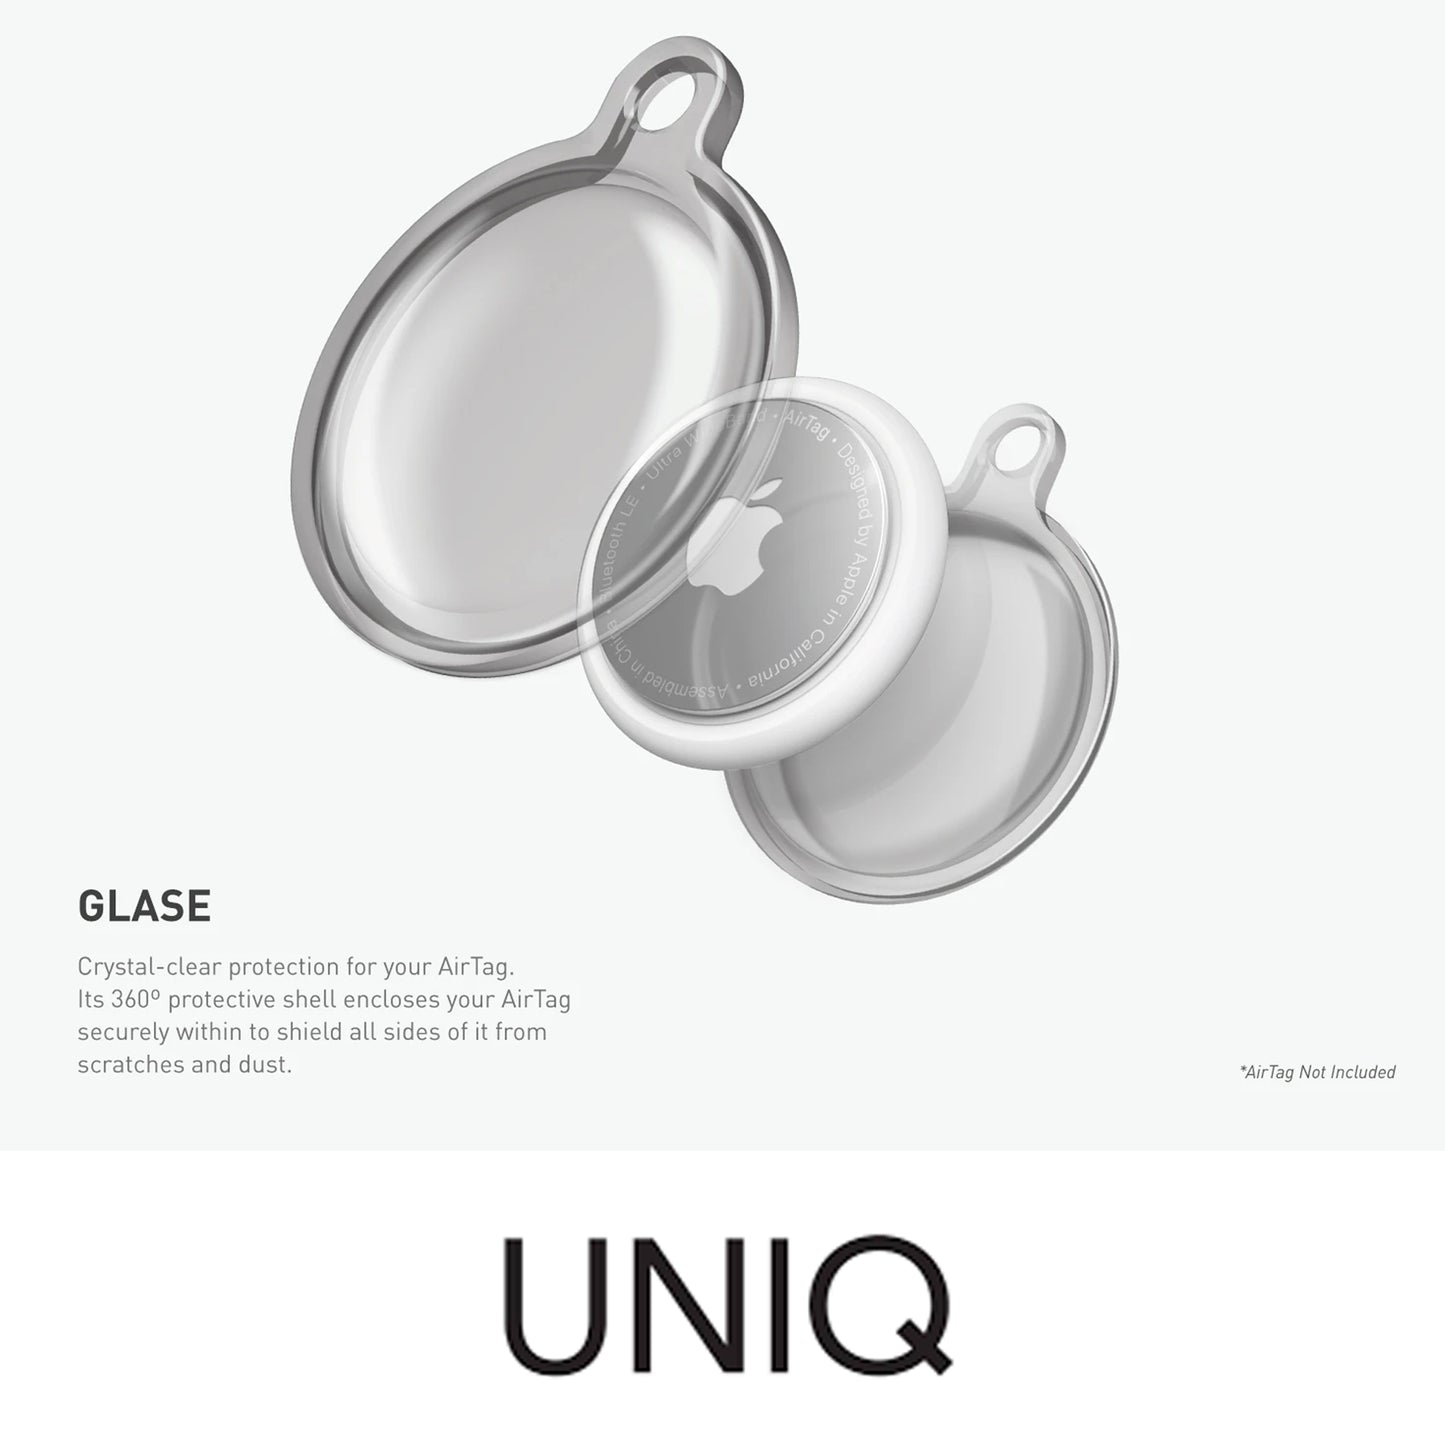 UNIQ Glase Case for AirTag - Clear Protective Case in True Clarity - Clear (Barcode: 8886463677445 )